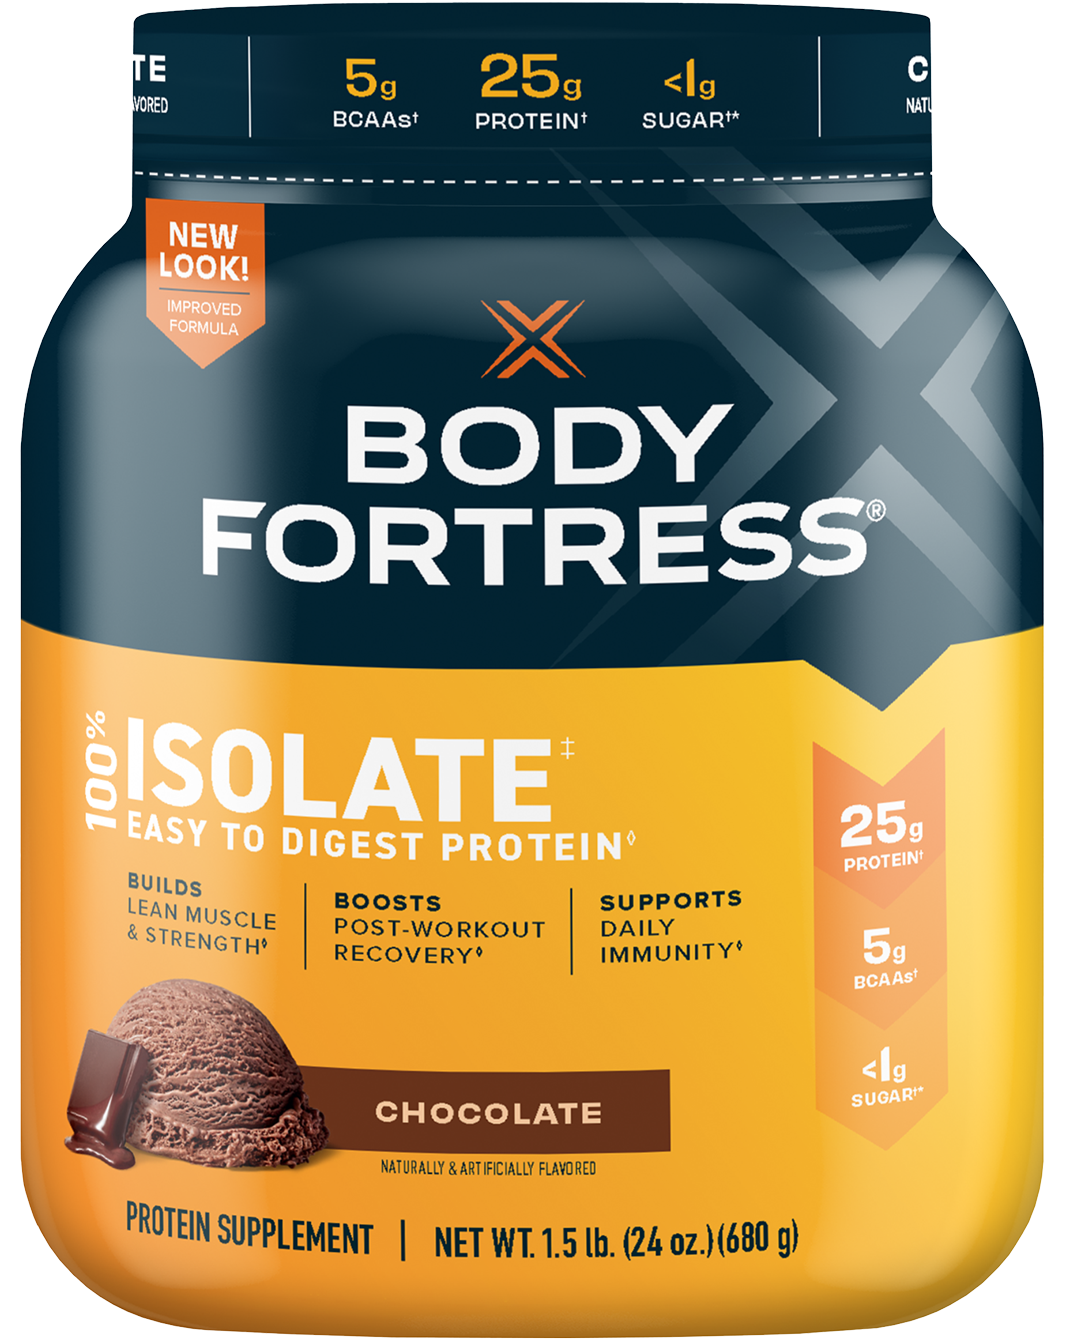 100% Isolate, Easy to Digest Protein Powder, Chocolate